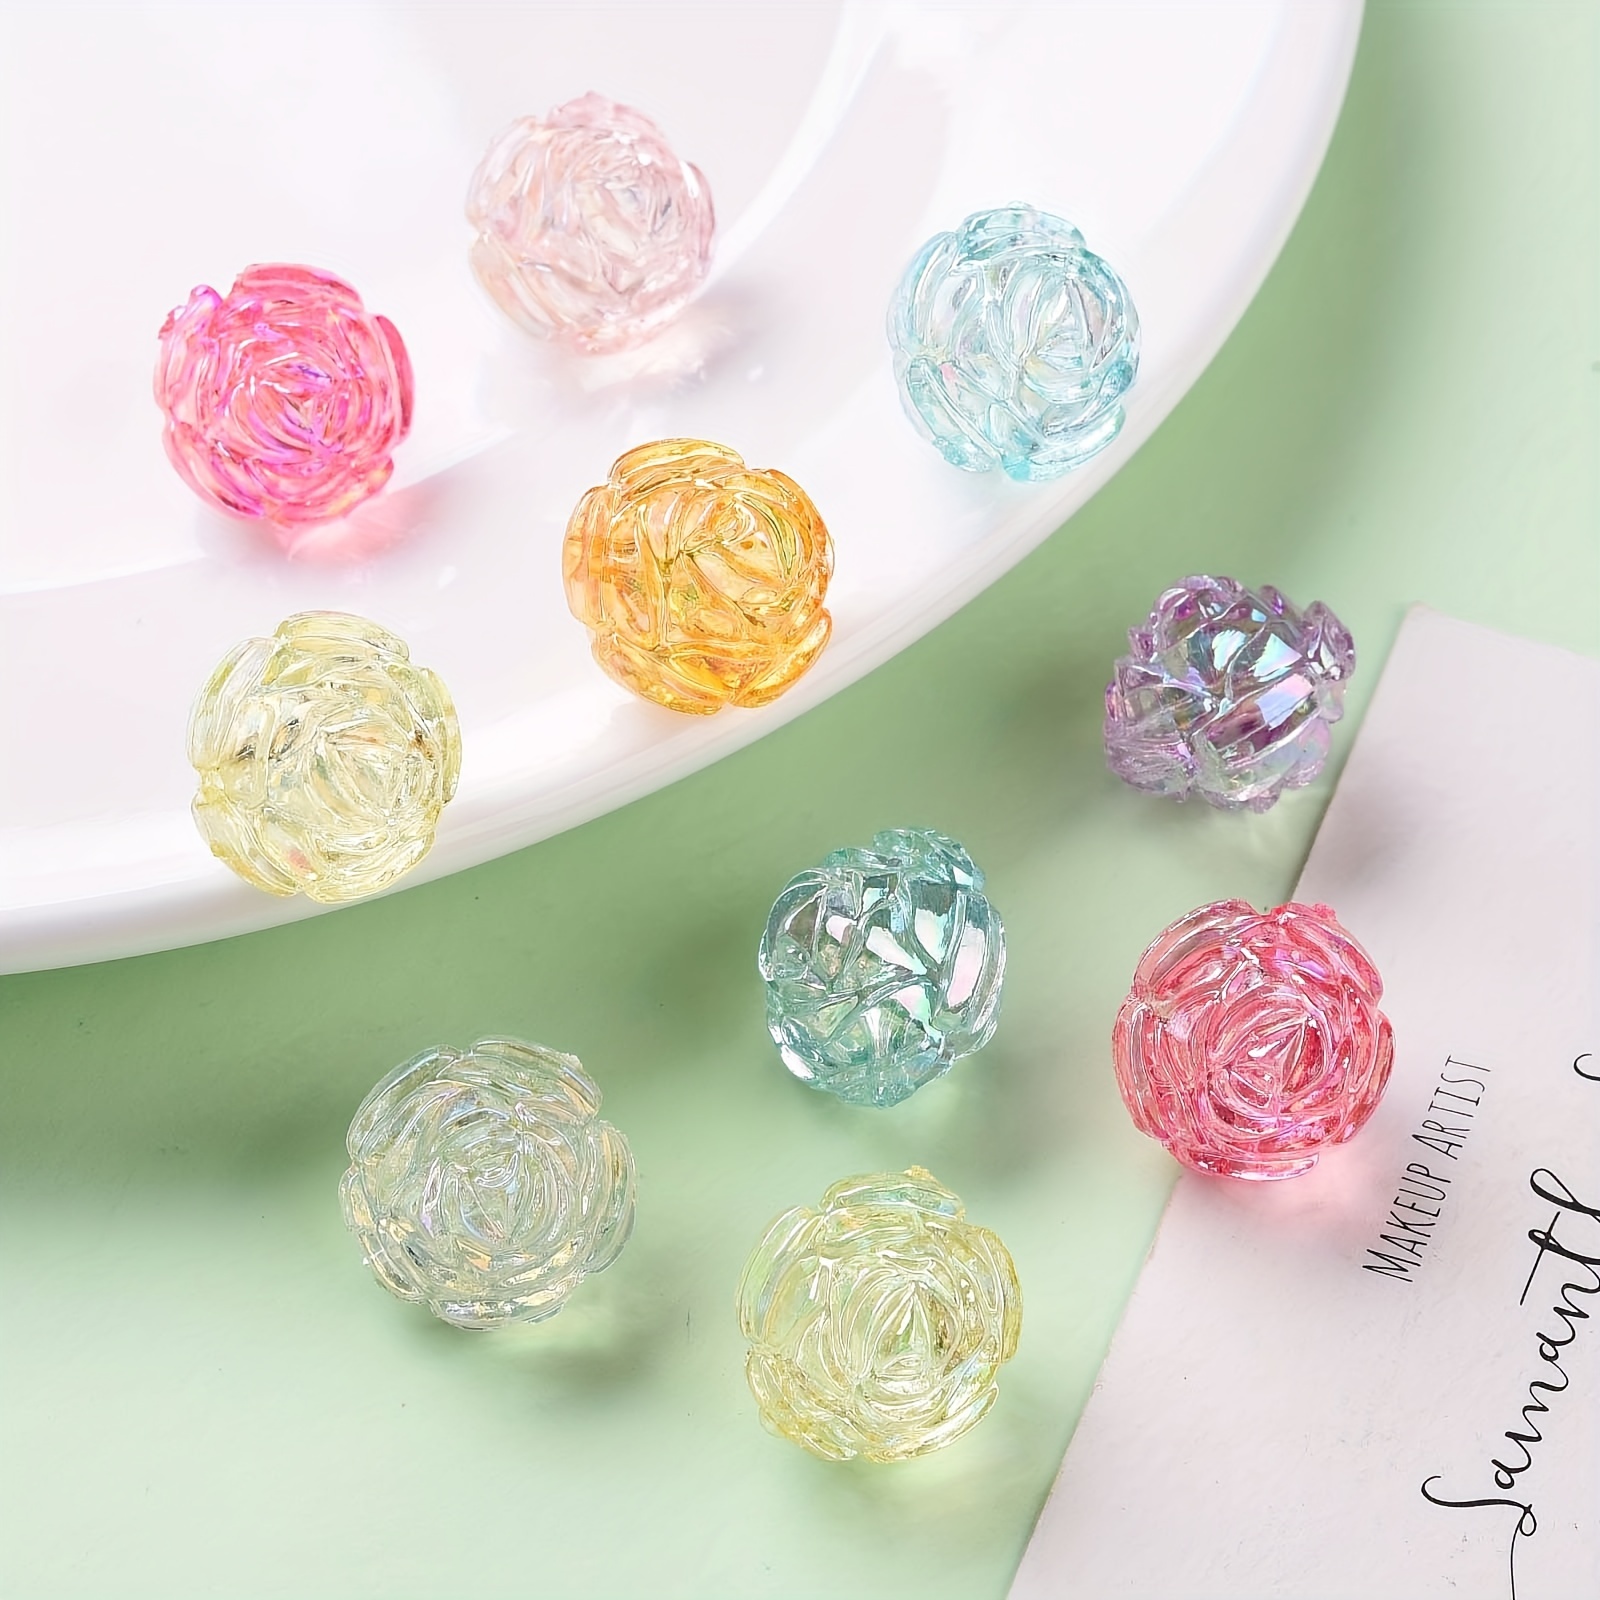 

20pcs 18mm Transparent Acrylic Beads, Rose Flower Shape Colorful Loose Beads For Jewelry Making Diy Bracelet Necklace Random Mixed Ab Color 18x16.5mm, Hole: 2.5mm